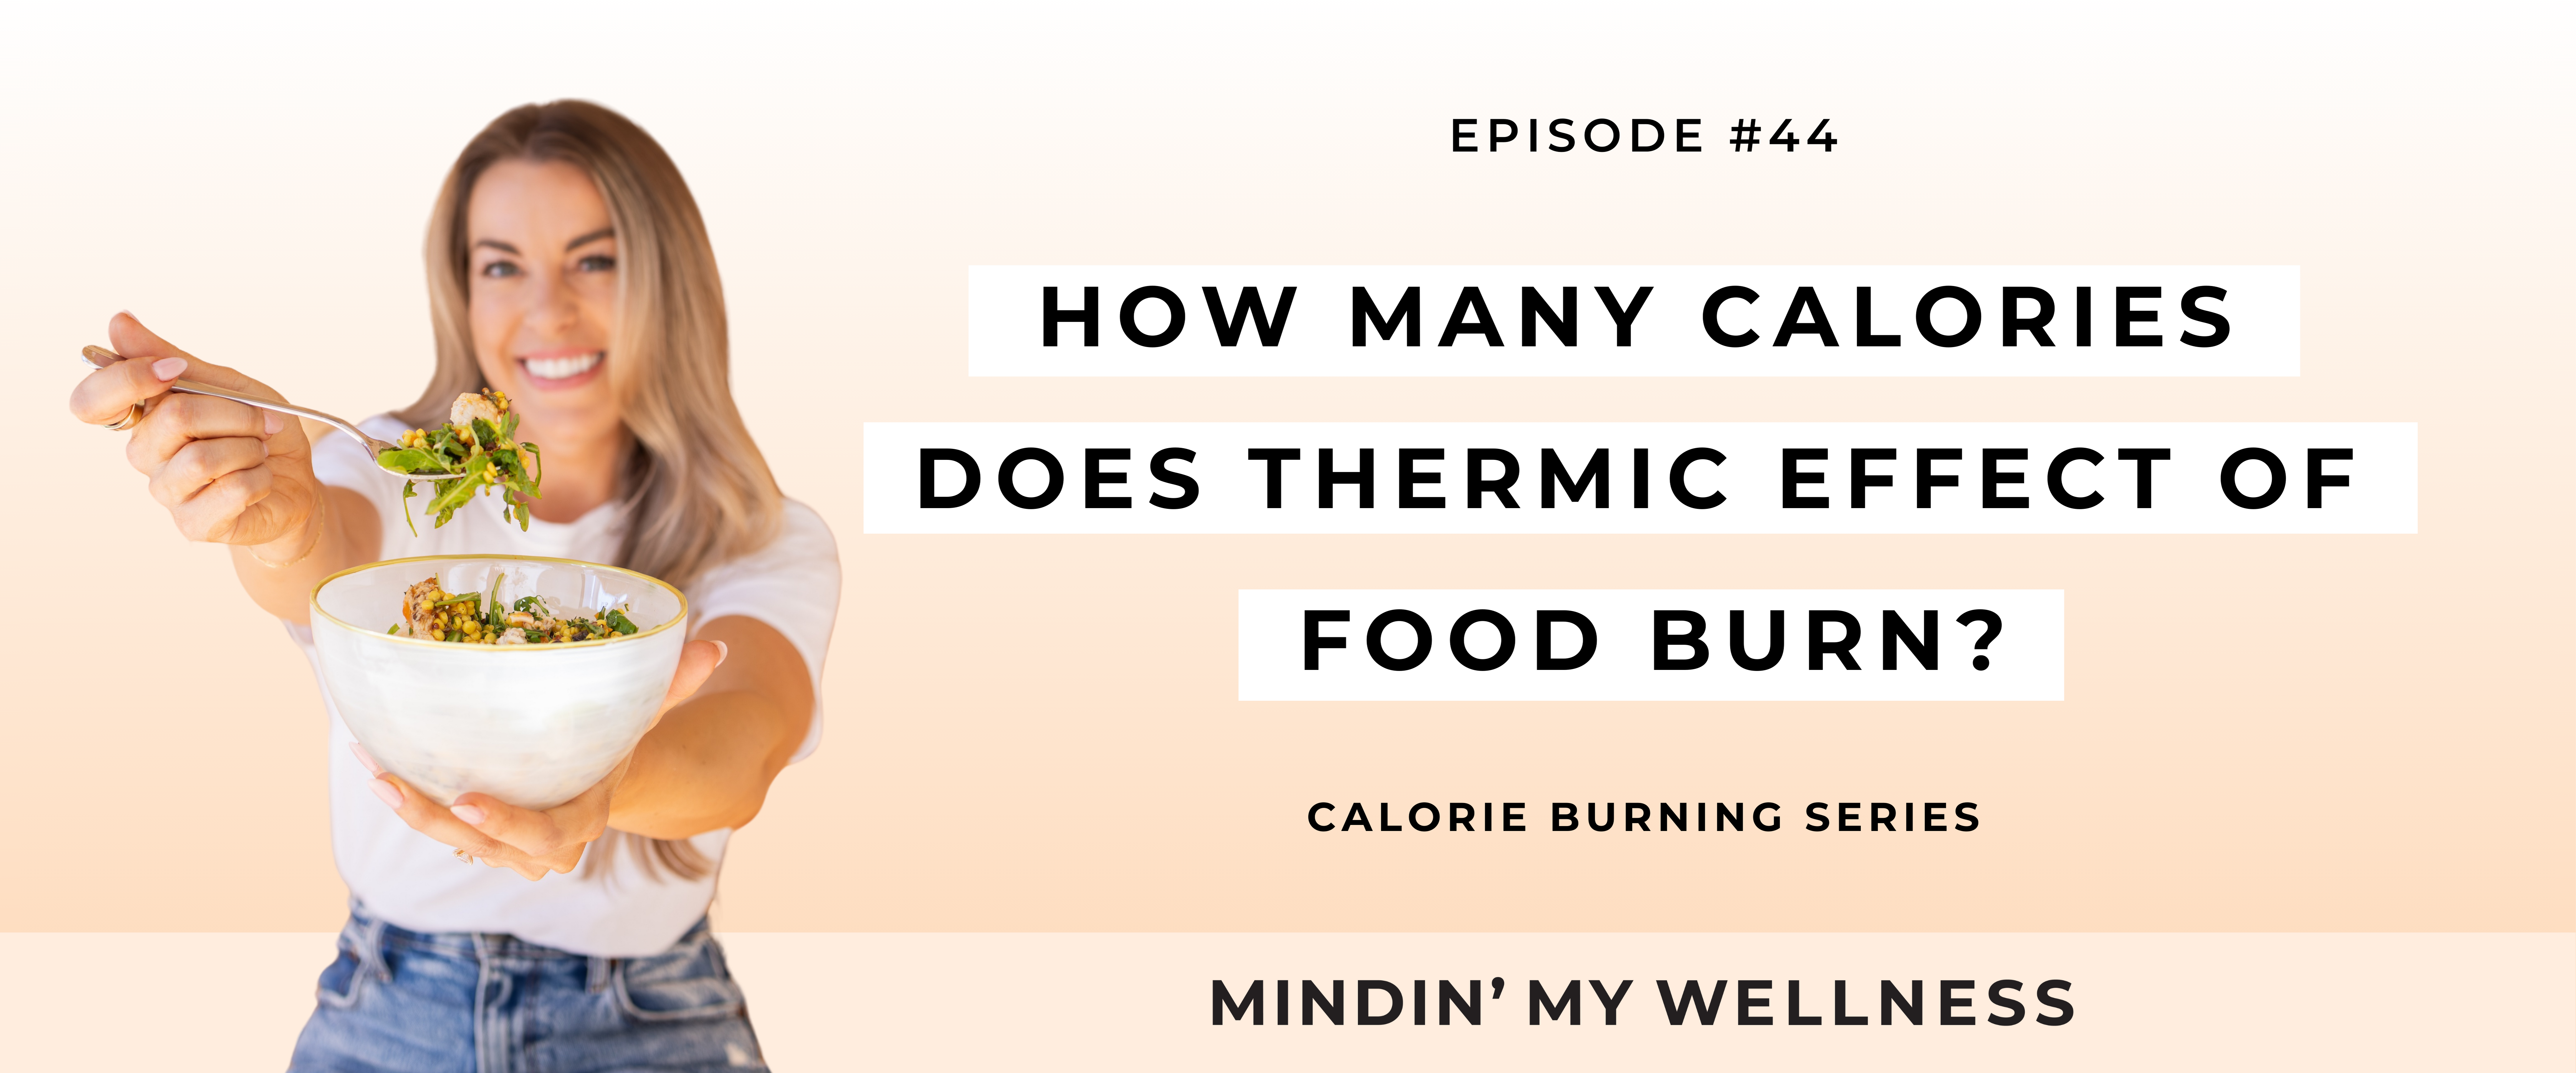 How Many Calories Does Thermic Effect of Food Burn?